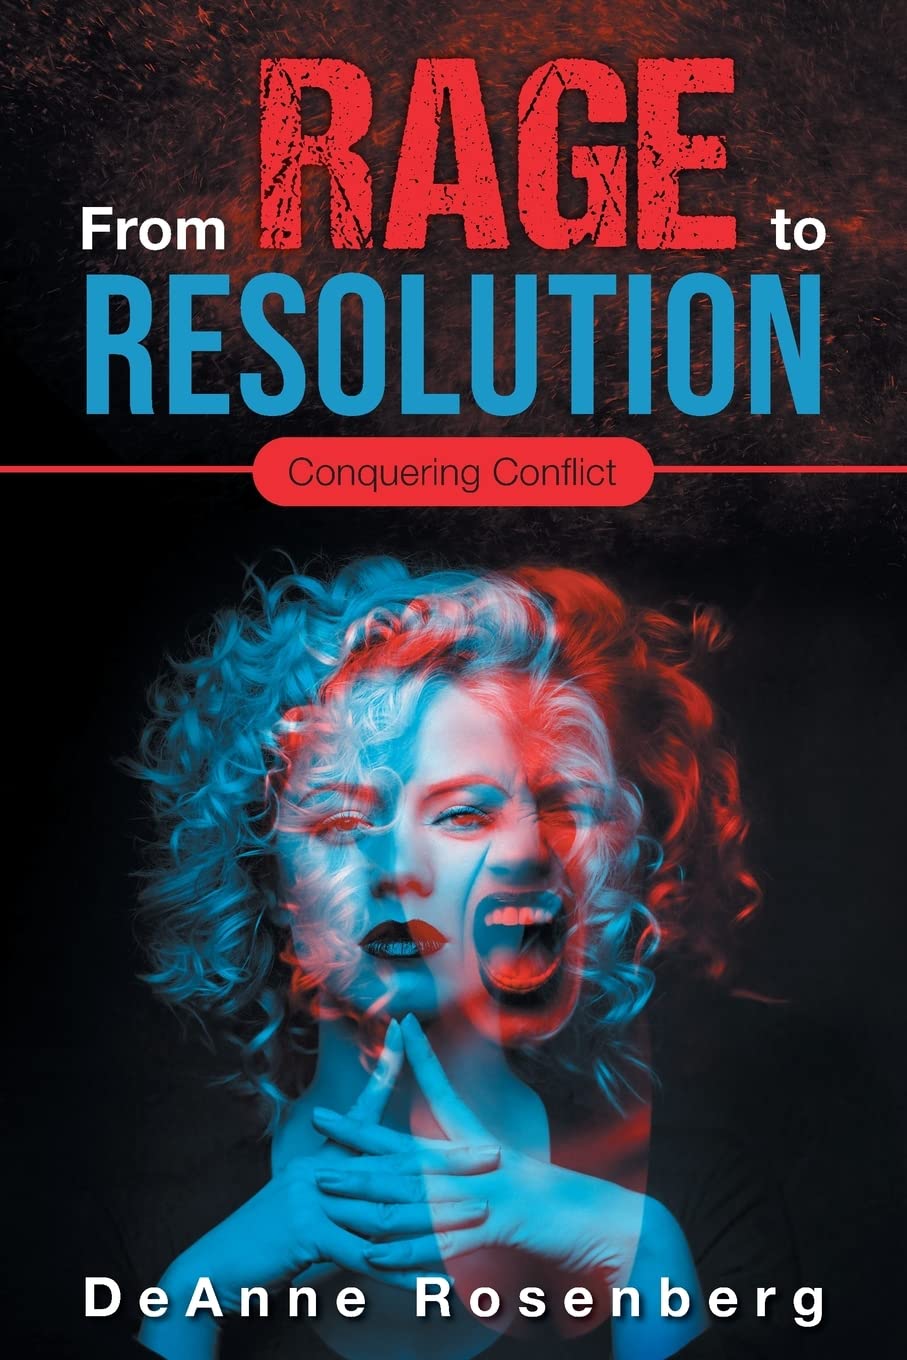 From Rage To Resolution: Conquering Conflict by Deanne Rosenberg